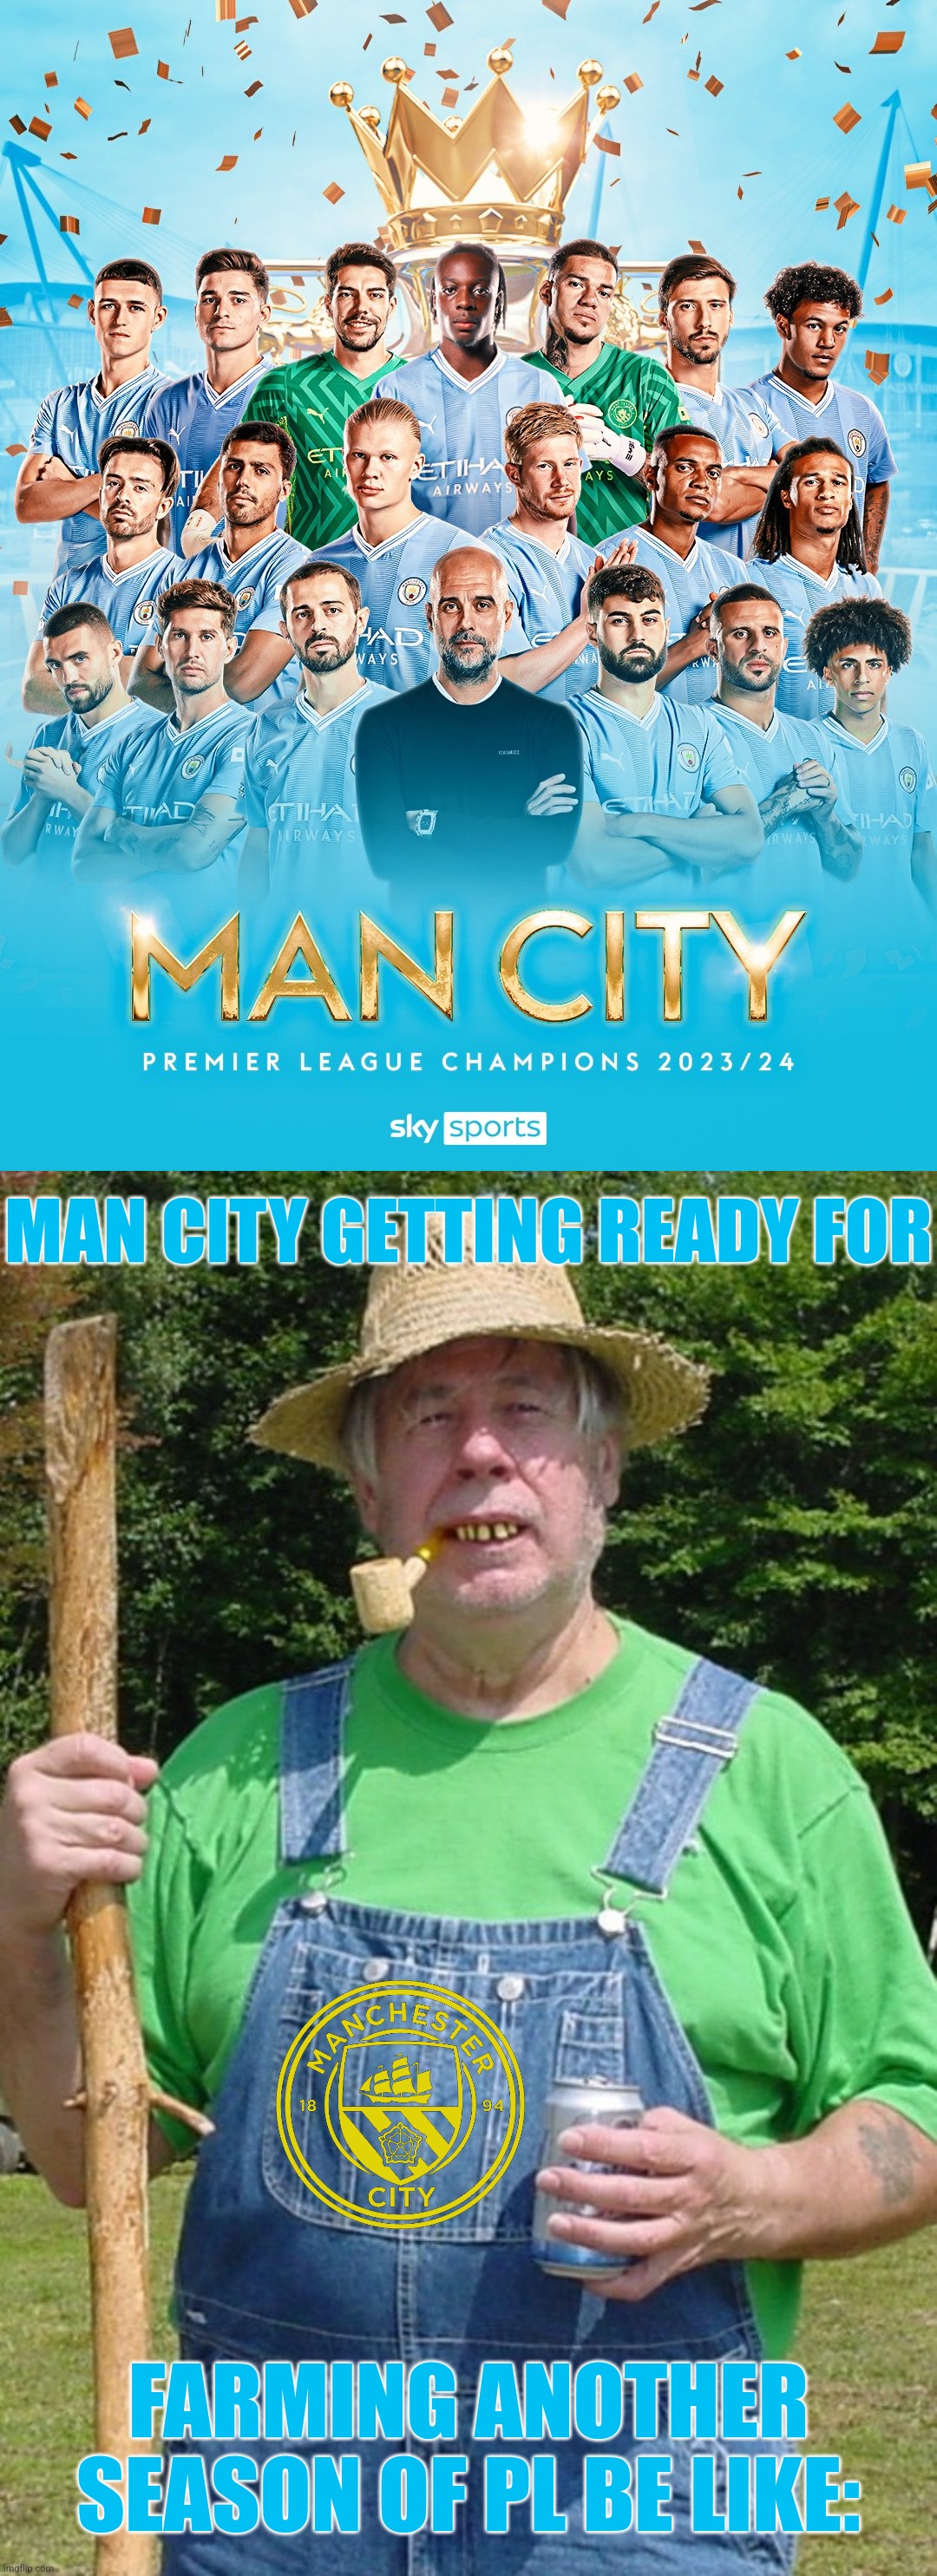 M. City - West Ham 3-1 | Man City are champions again | MAN CITY GETTING READY FOR; FARMING ANOTHER SEASON OF PL BE LIKE: | image tagged in redneck farmer,manchester city,premier league,football,soccer,memes | made w/ Imgflip meme maker